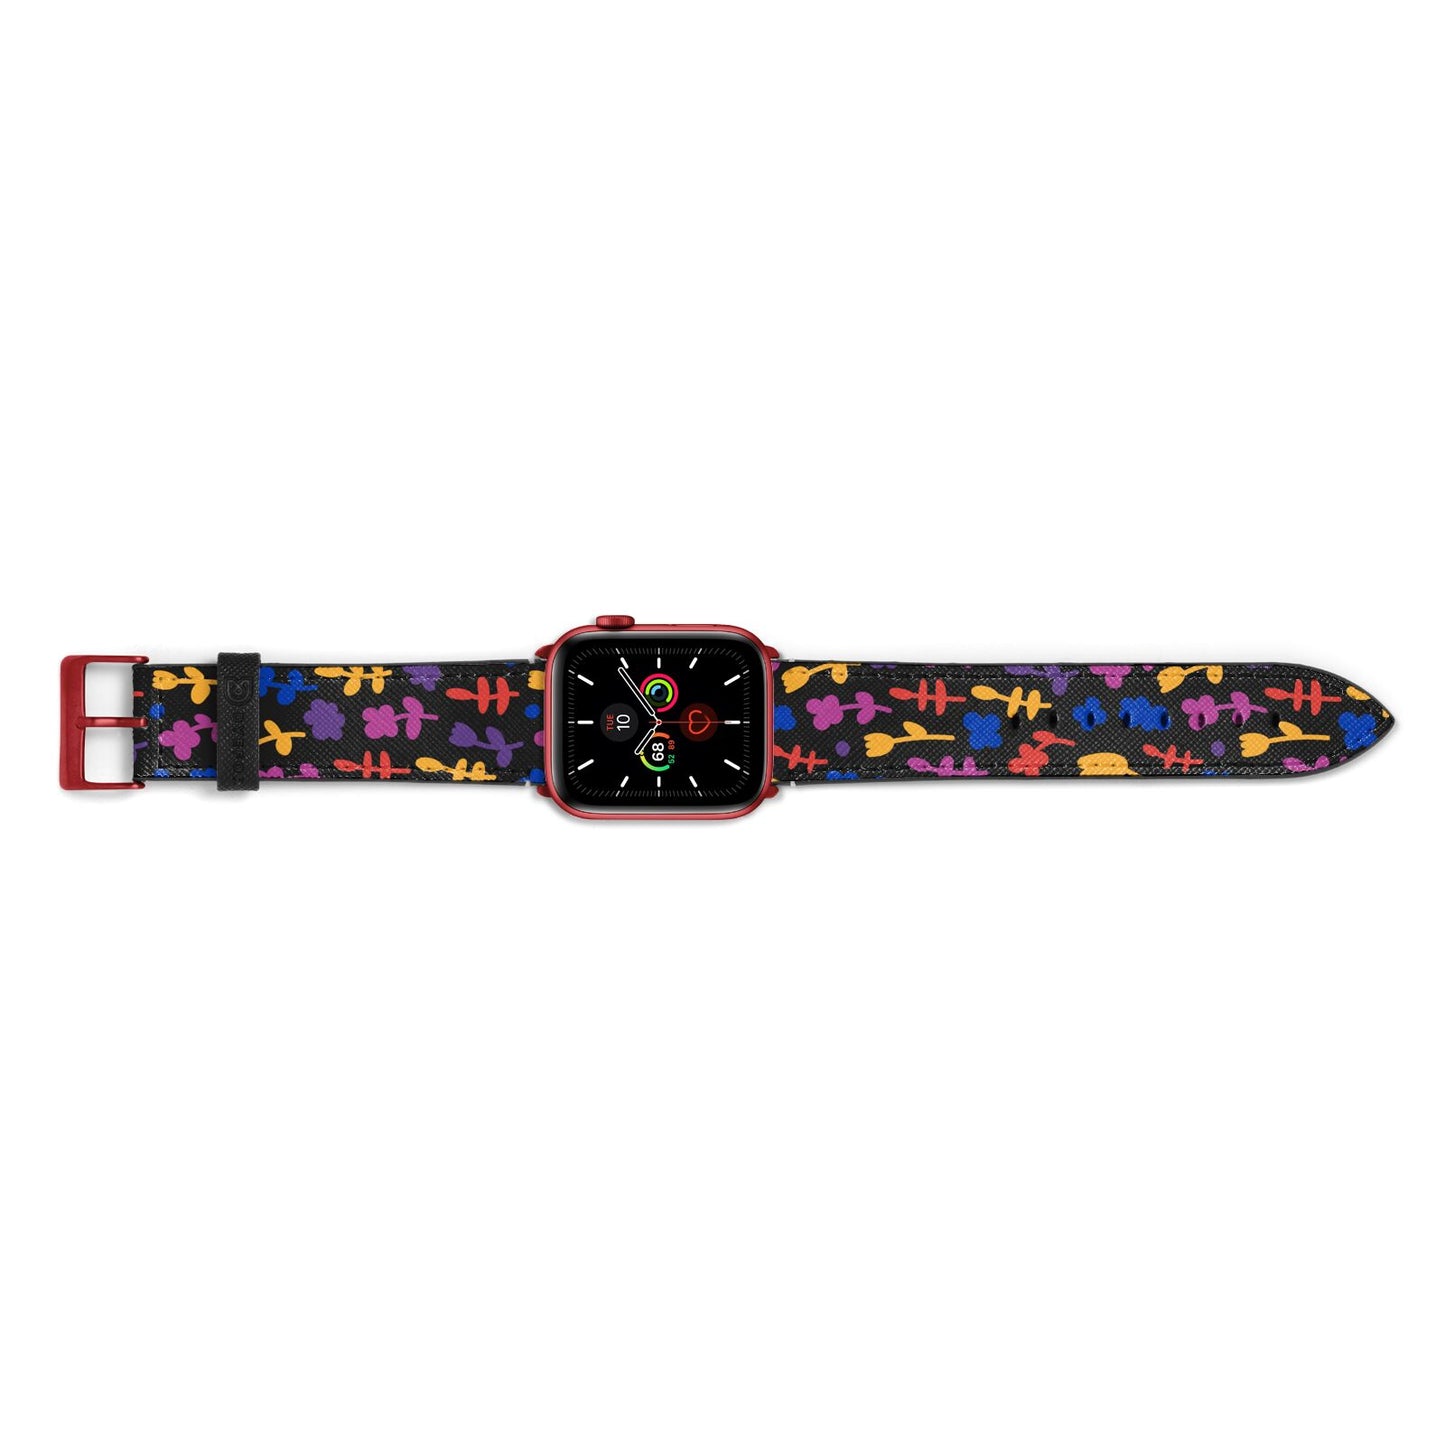 Abstract Floral Apple Watch Strap Landscape Image Red Hardware